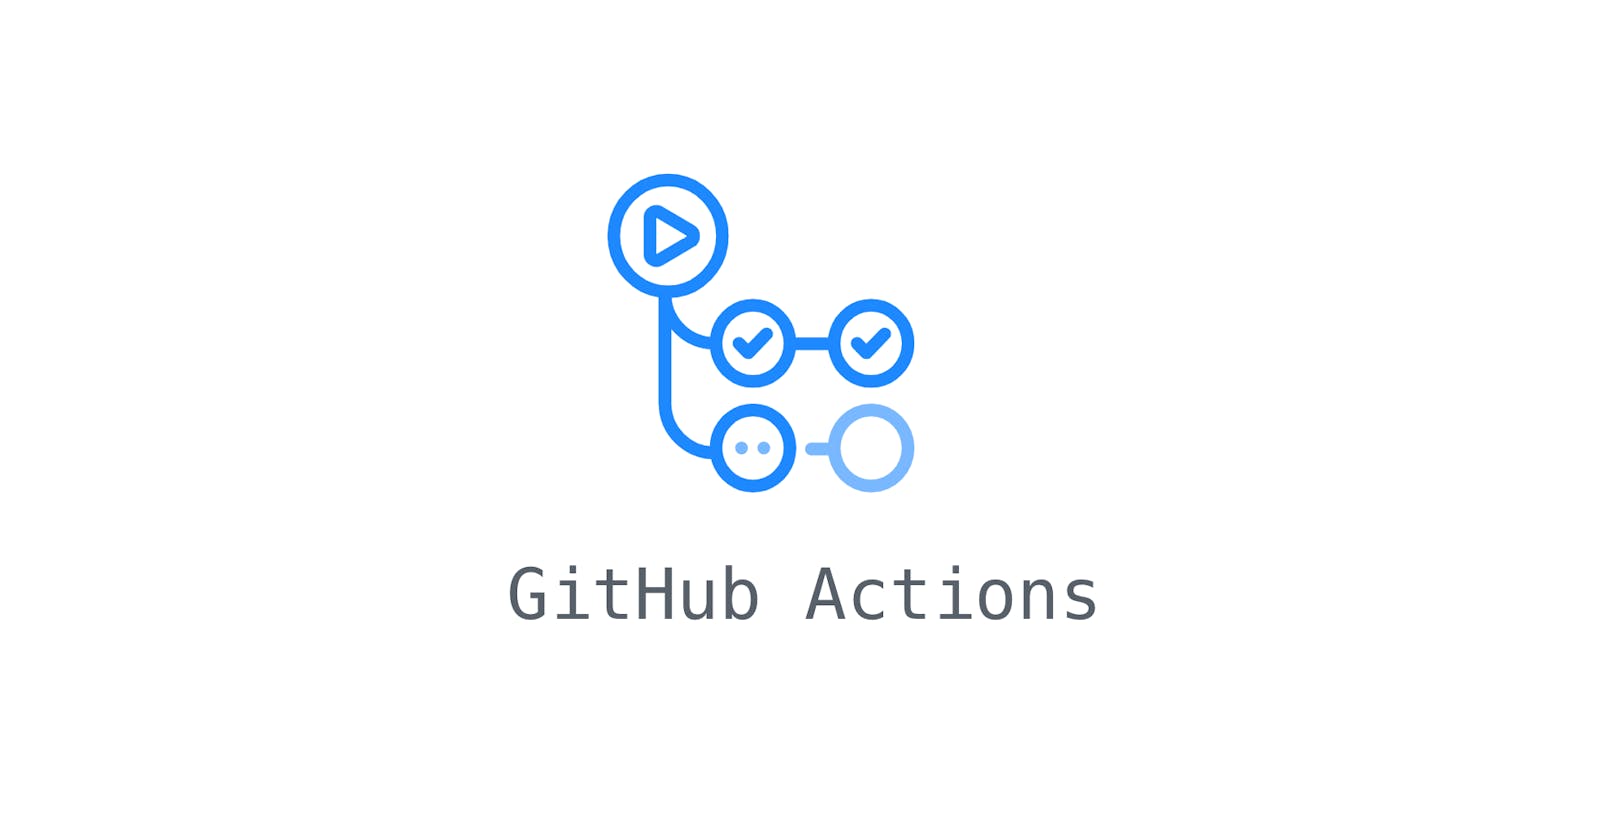 Deploy your data pipelines with Github Actions